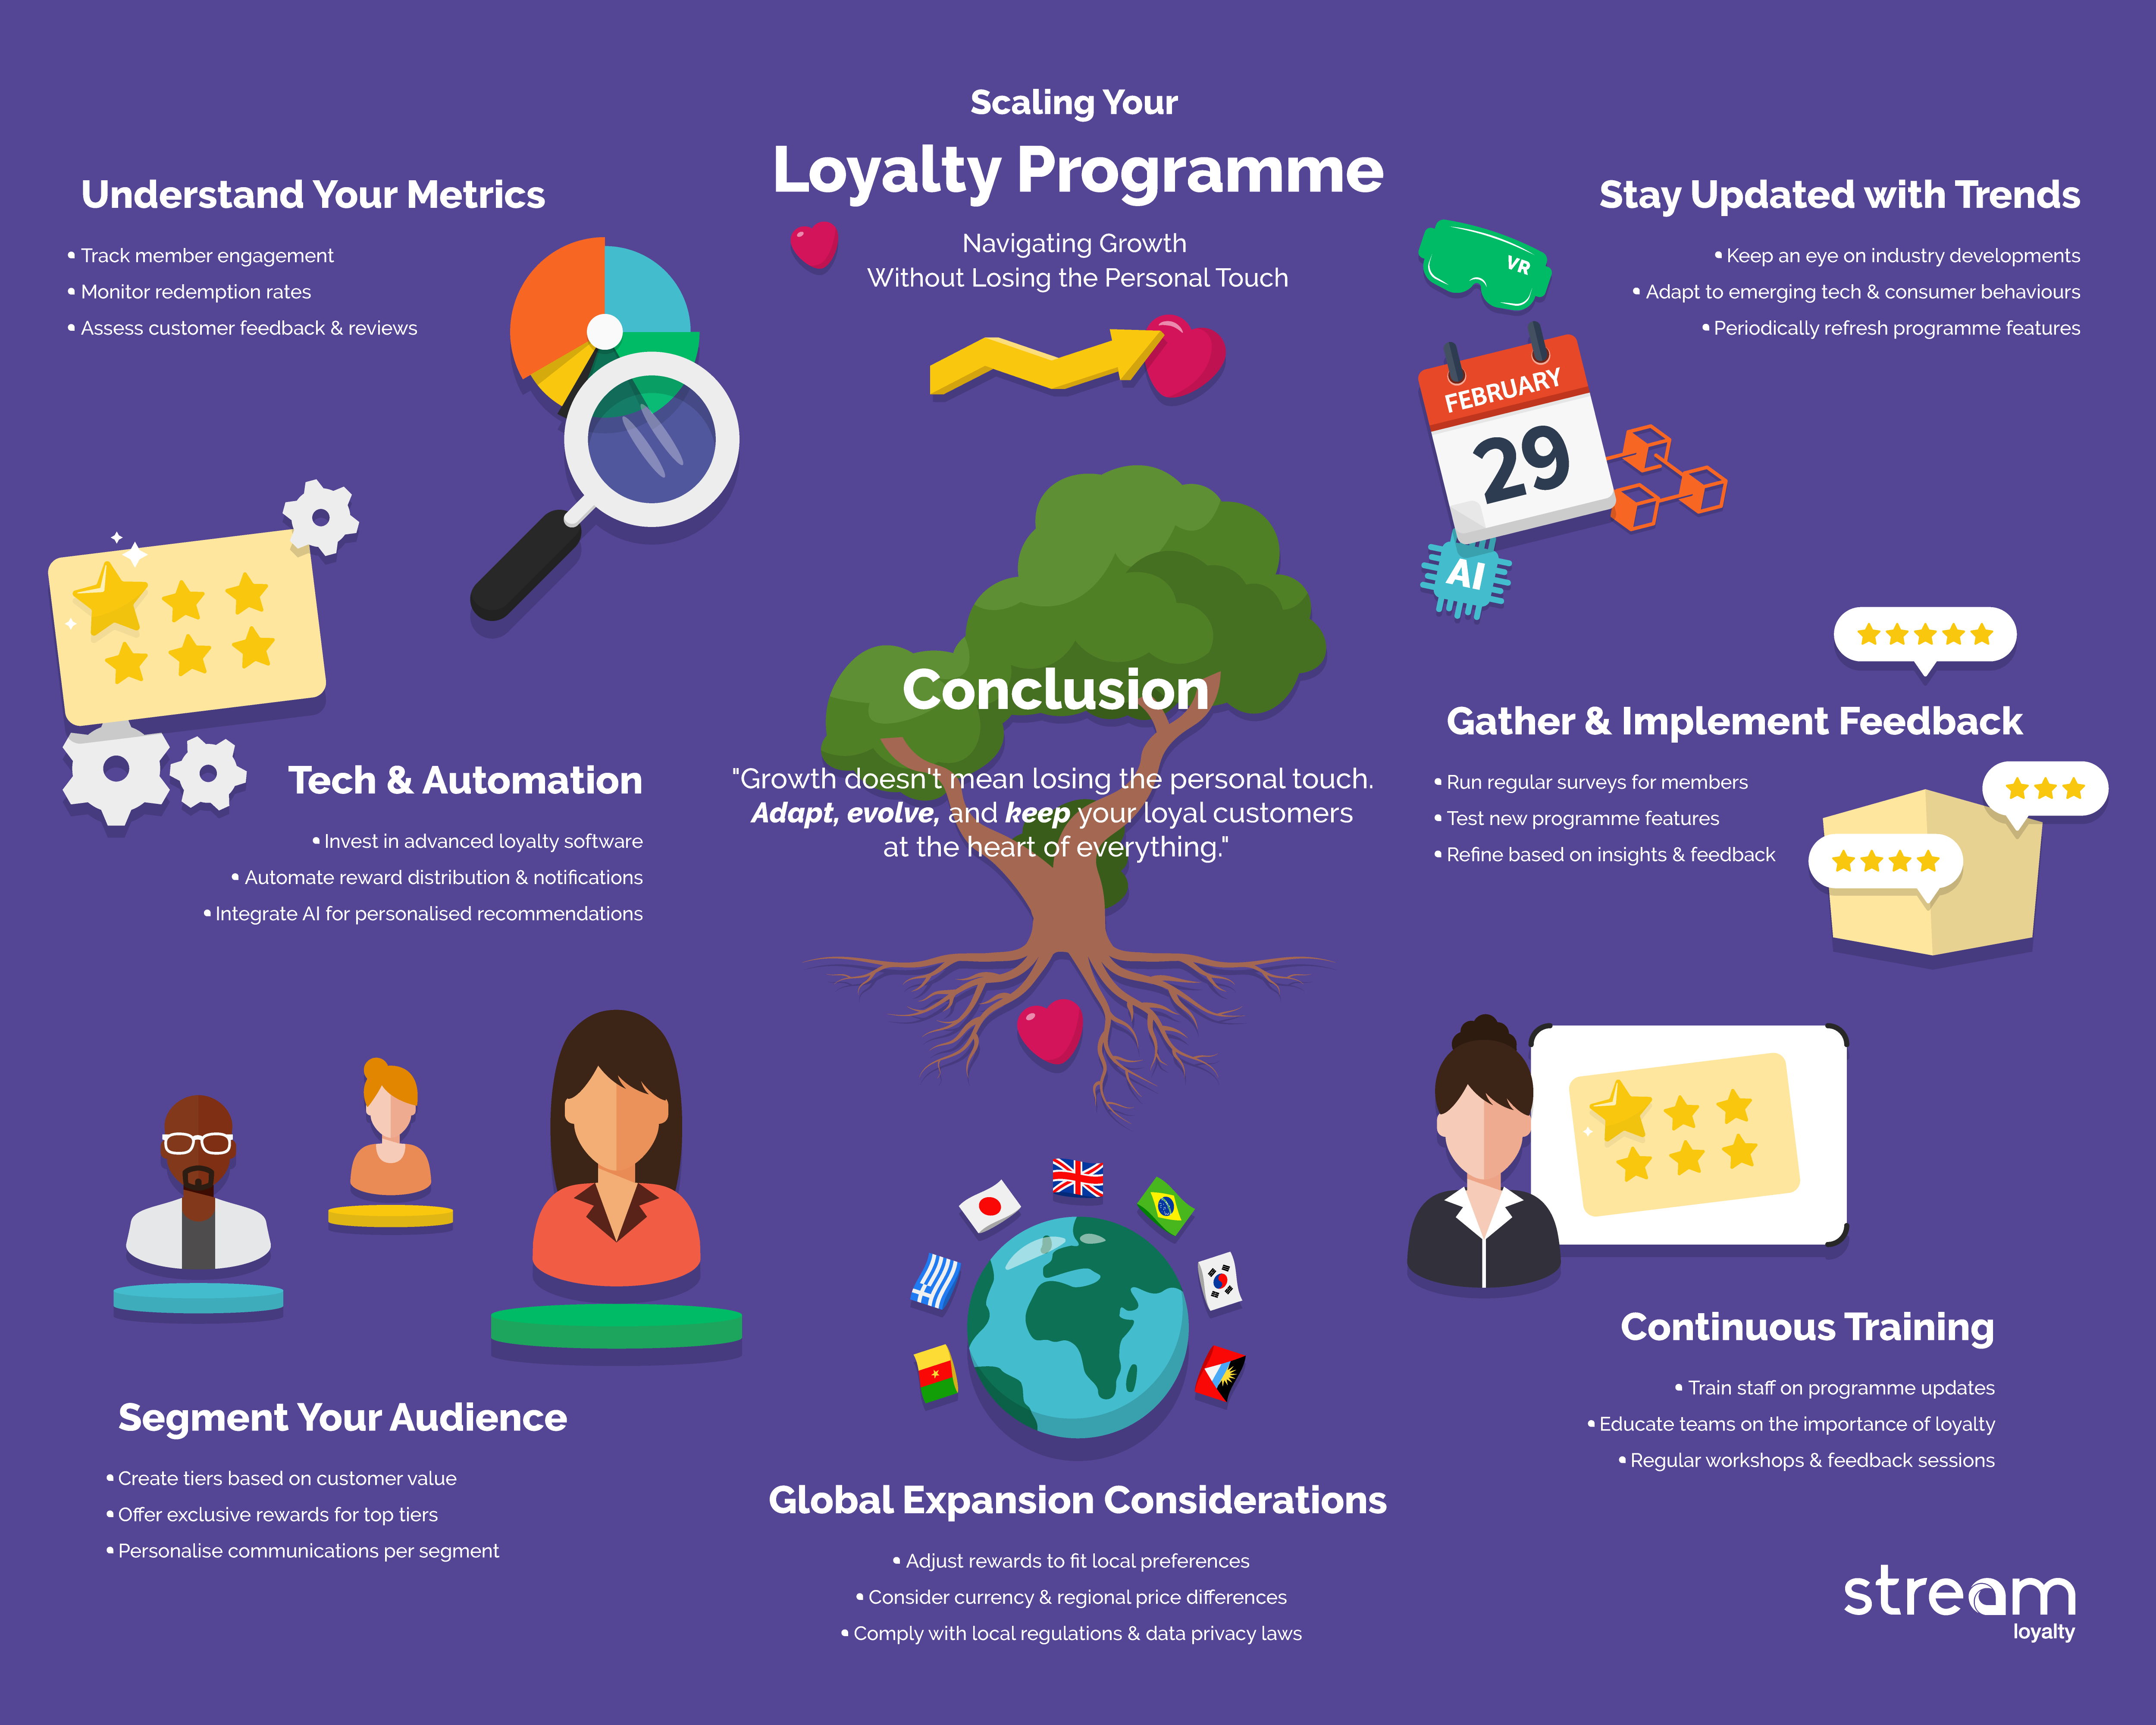 How To Scale Your Loyalty Progranme